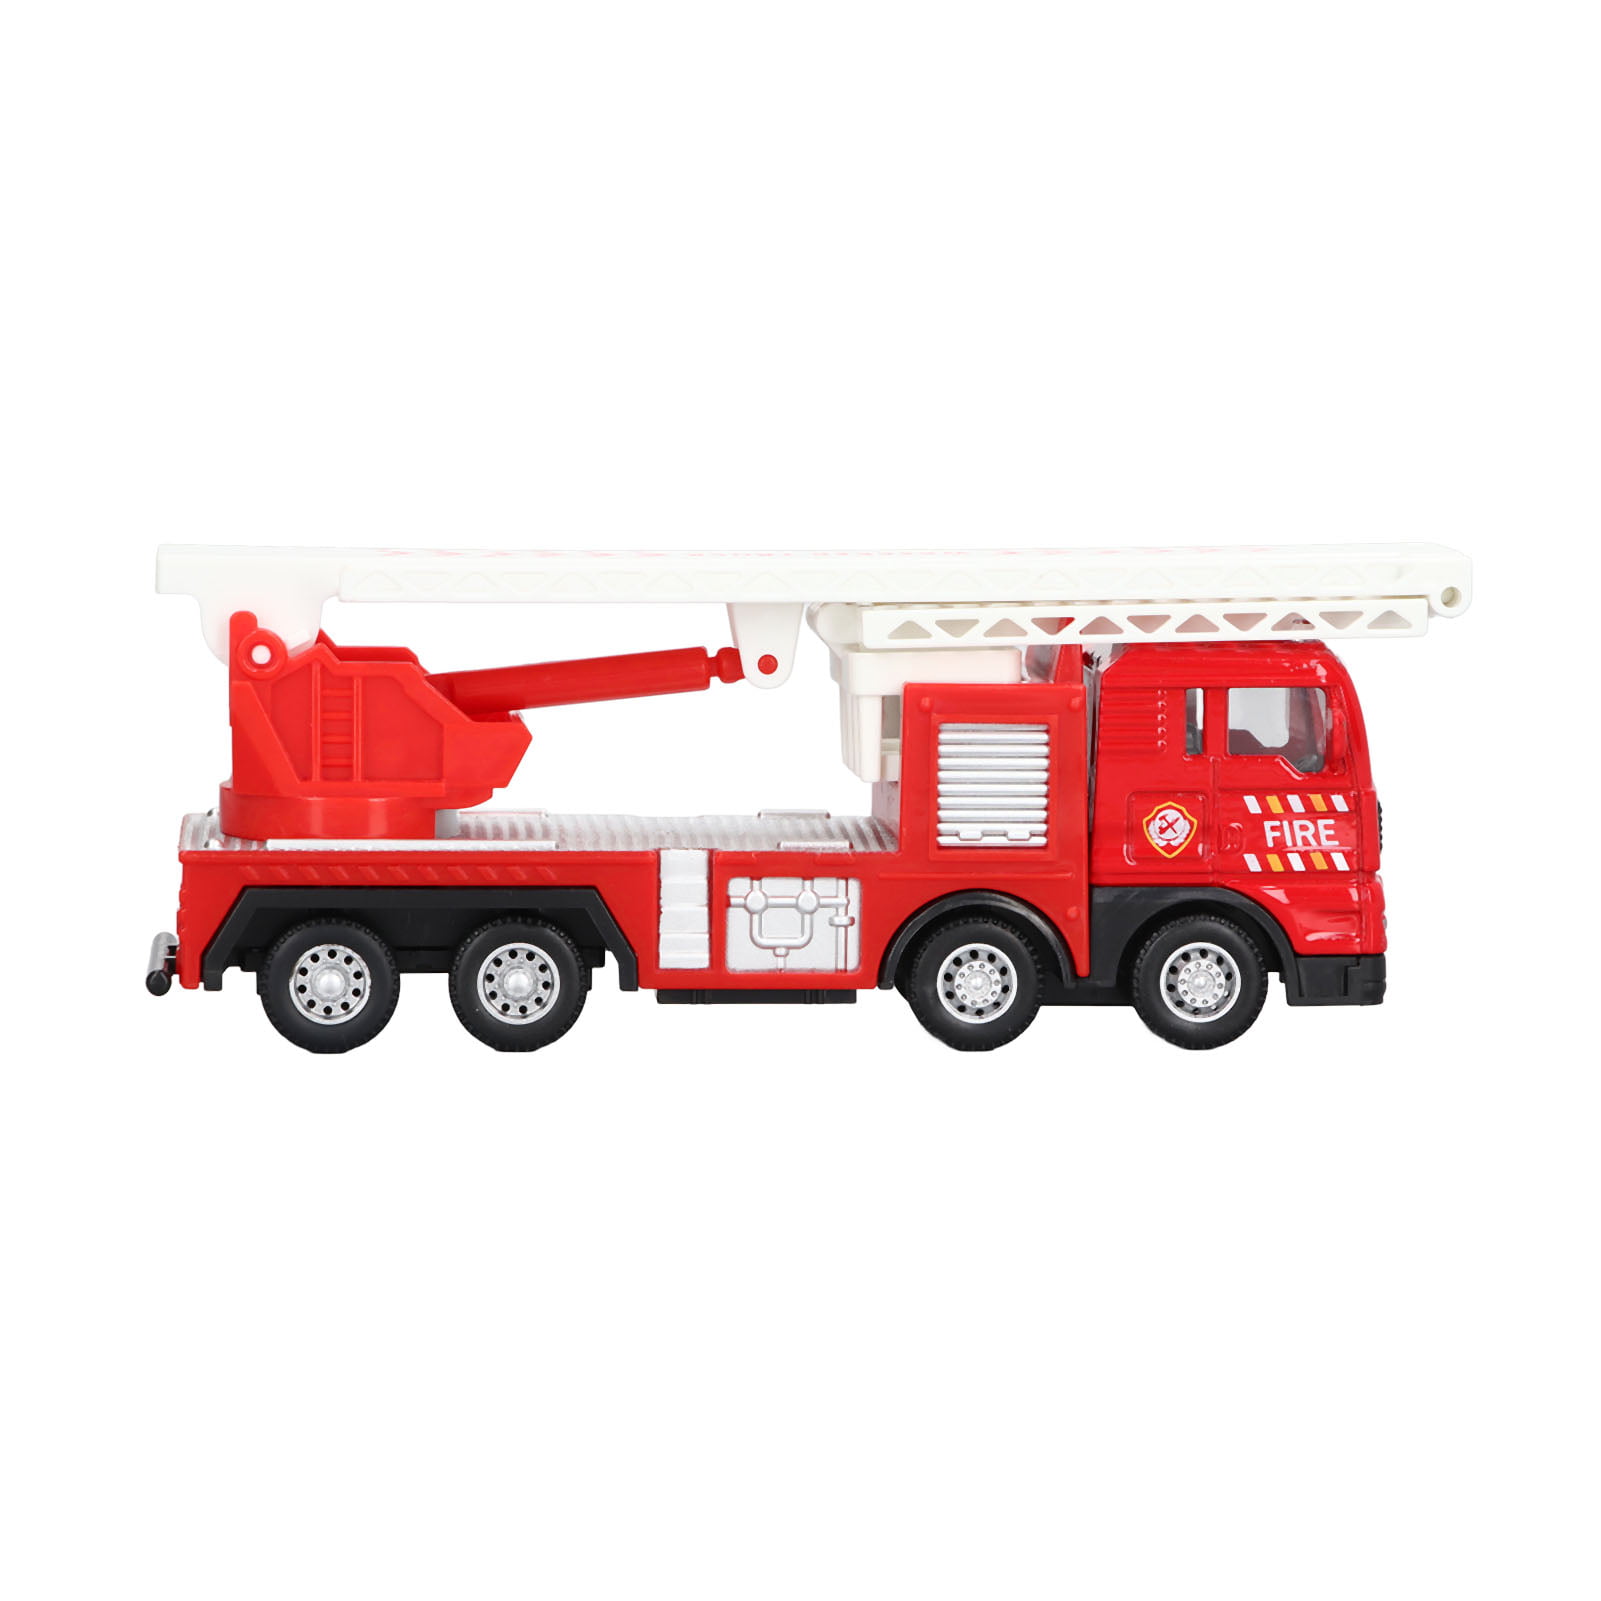  EERSTA 360 Degree Rotation, Fire Engine Model Toy with Ladder,  High Pressure Water Gun, Lights and Music, Fire Engine Model, Christmas  Birthday Toy Gift for Boy and Girl : Toys 